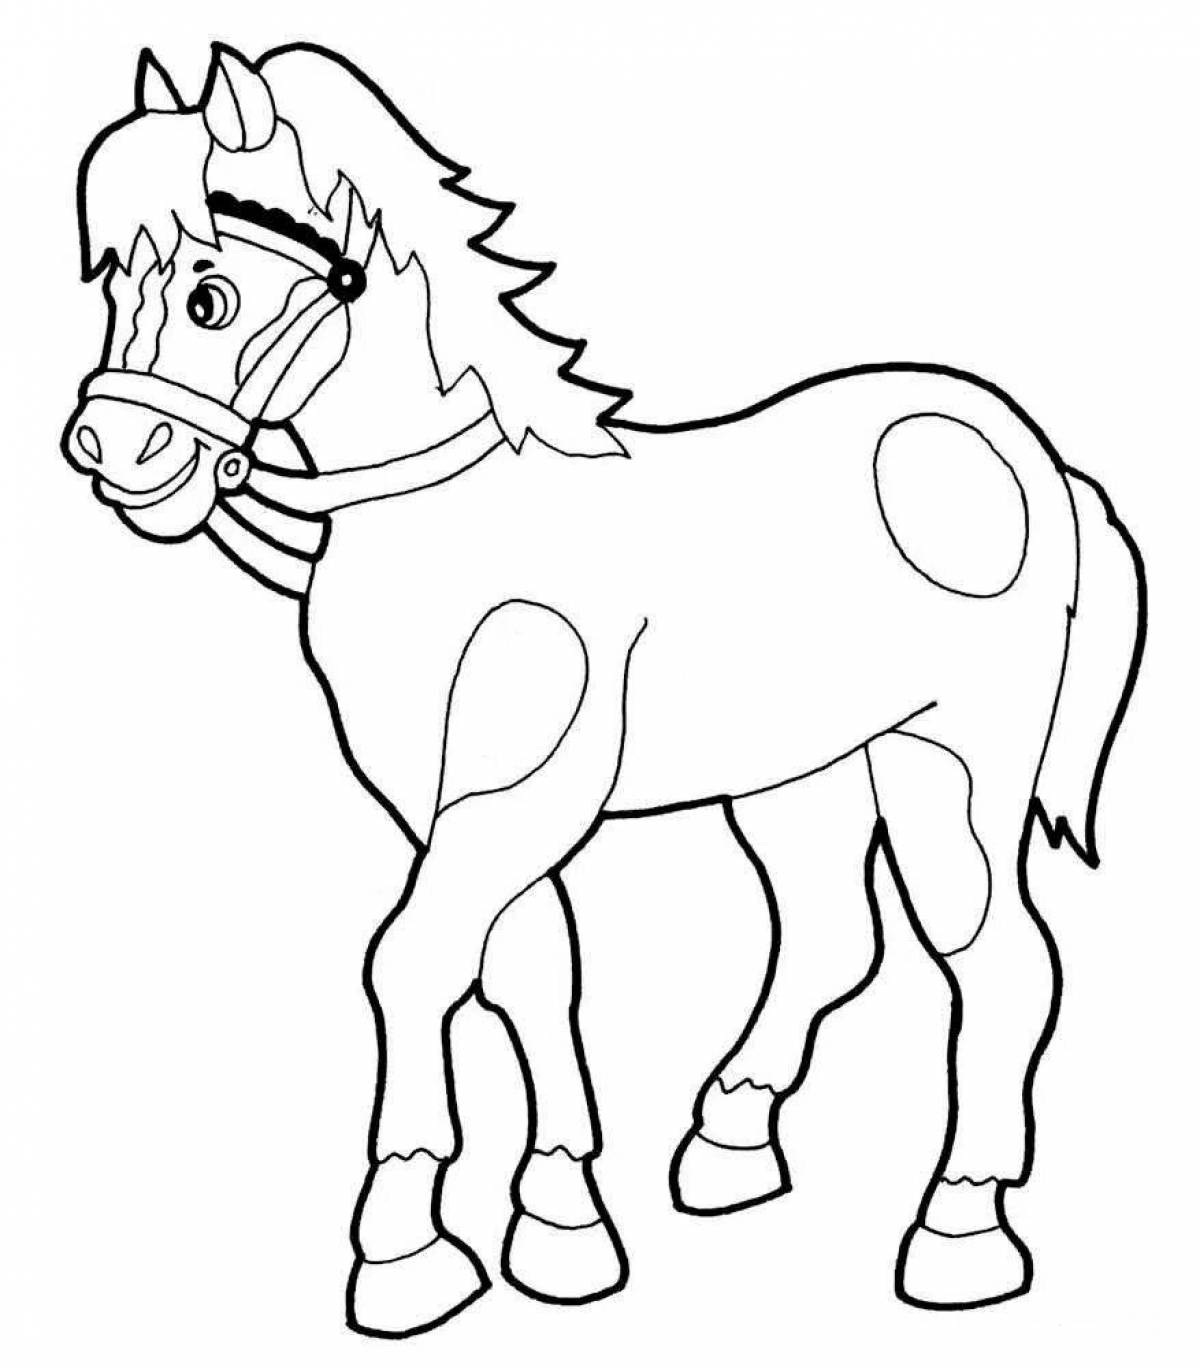 Coloring bright horse